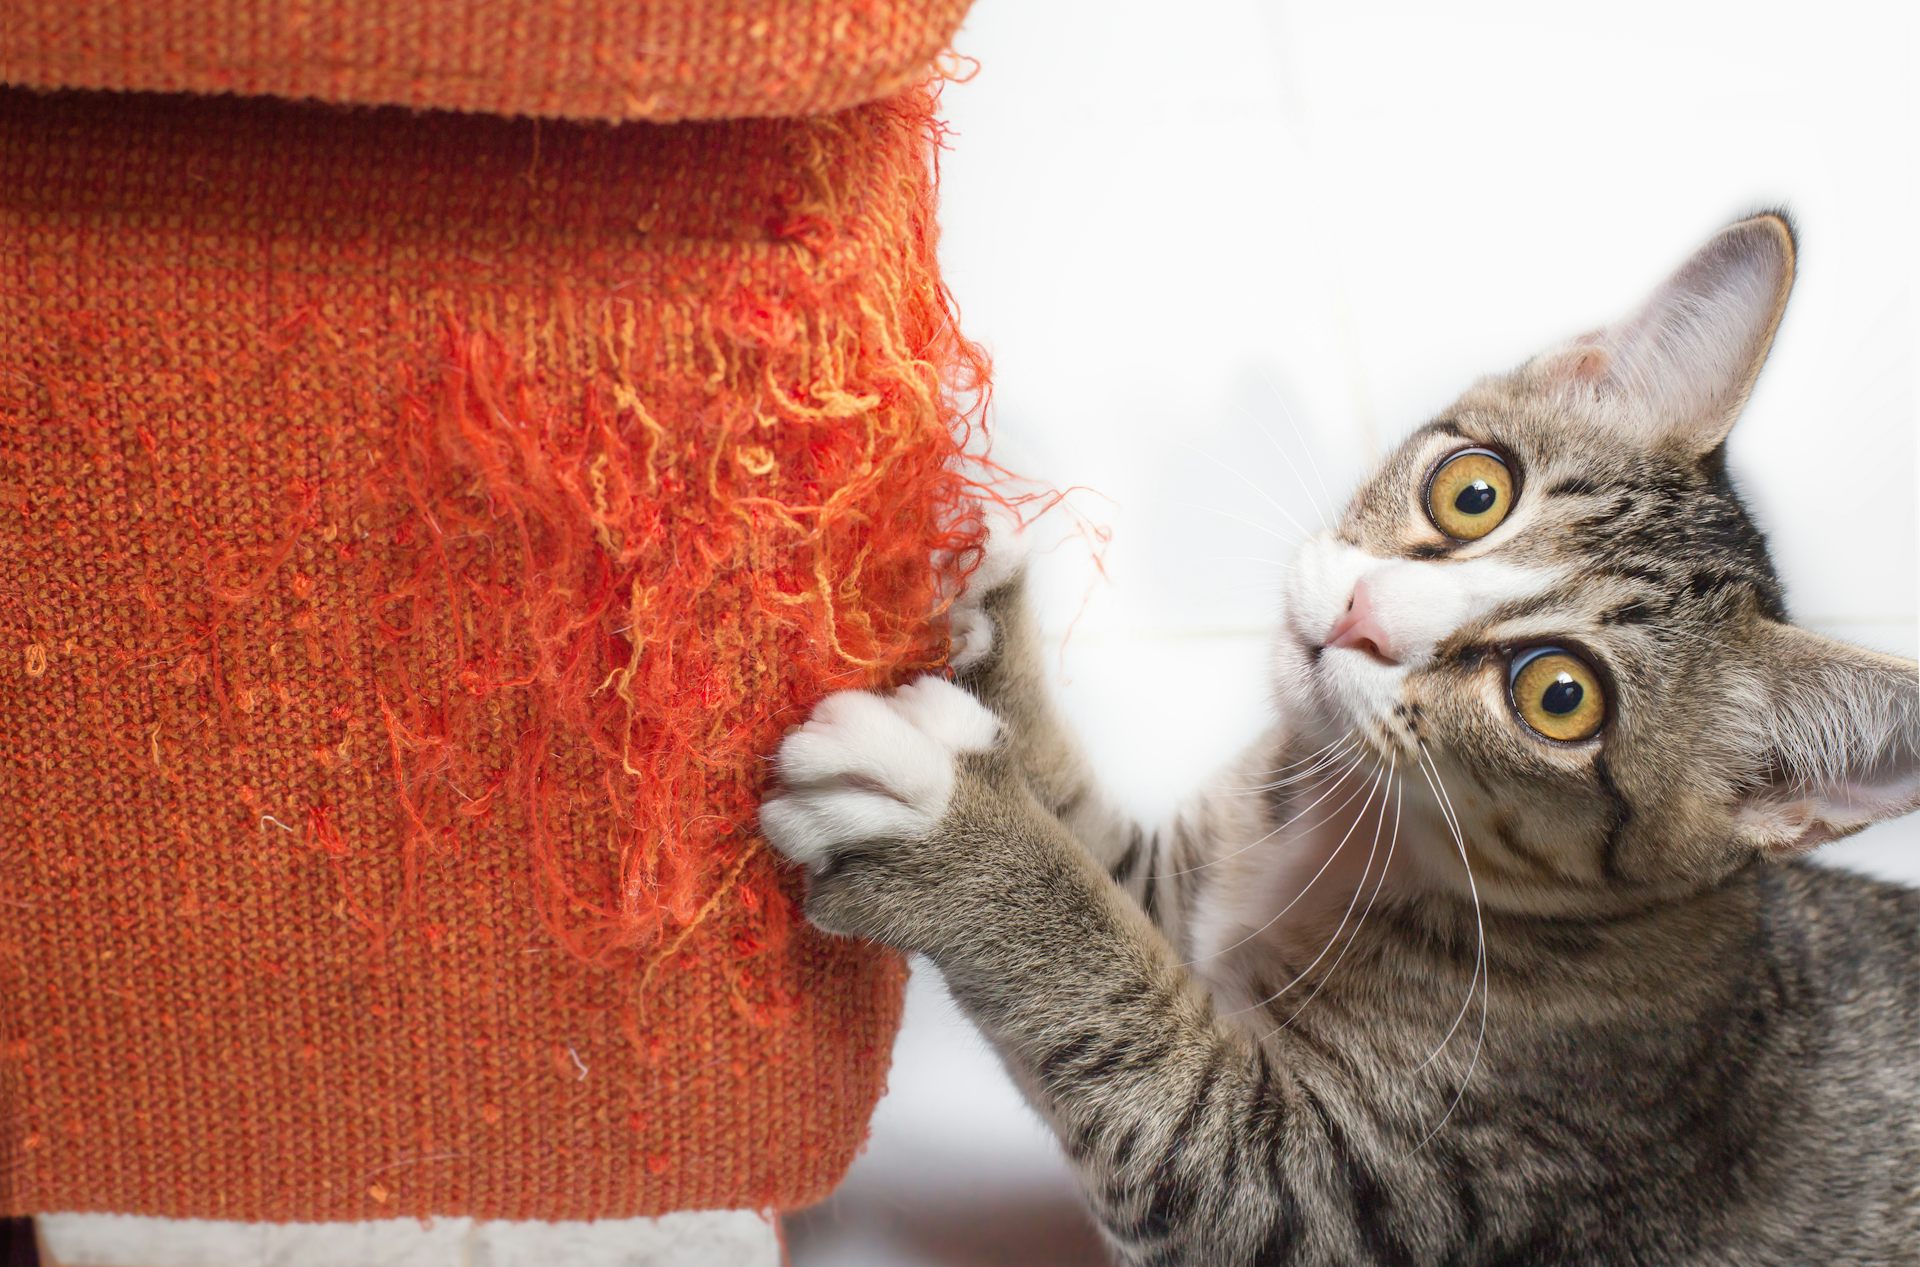 How are cats declawed, and is it painful?